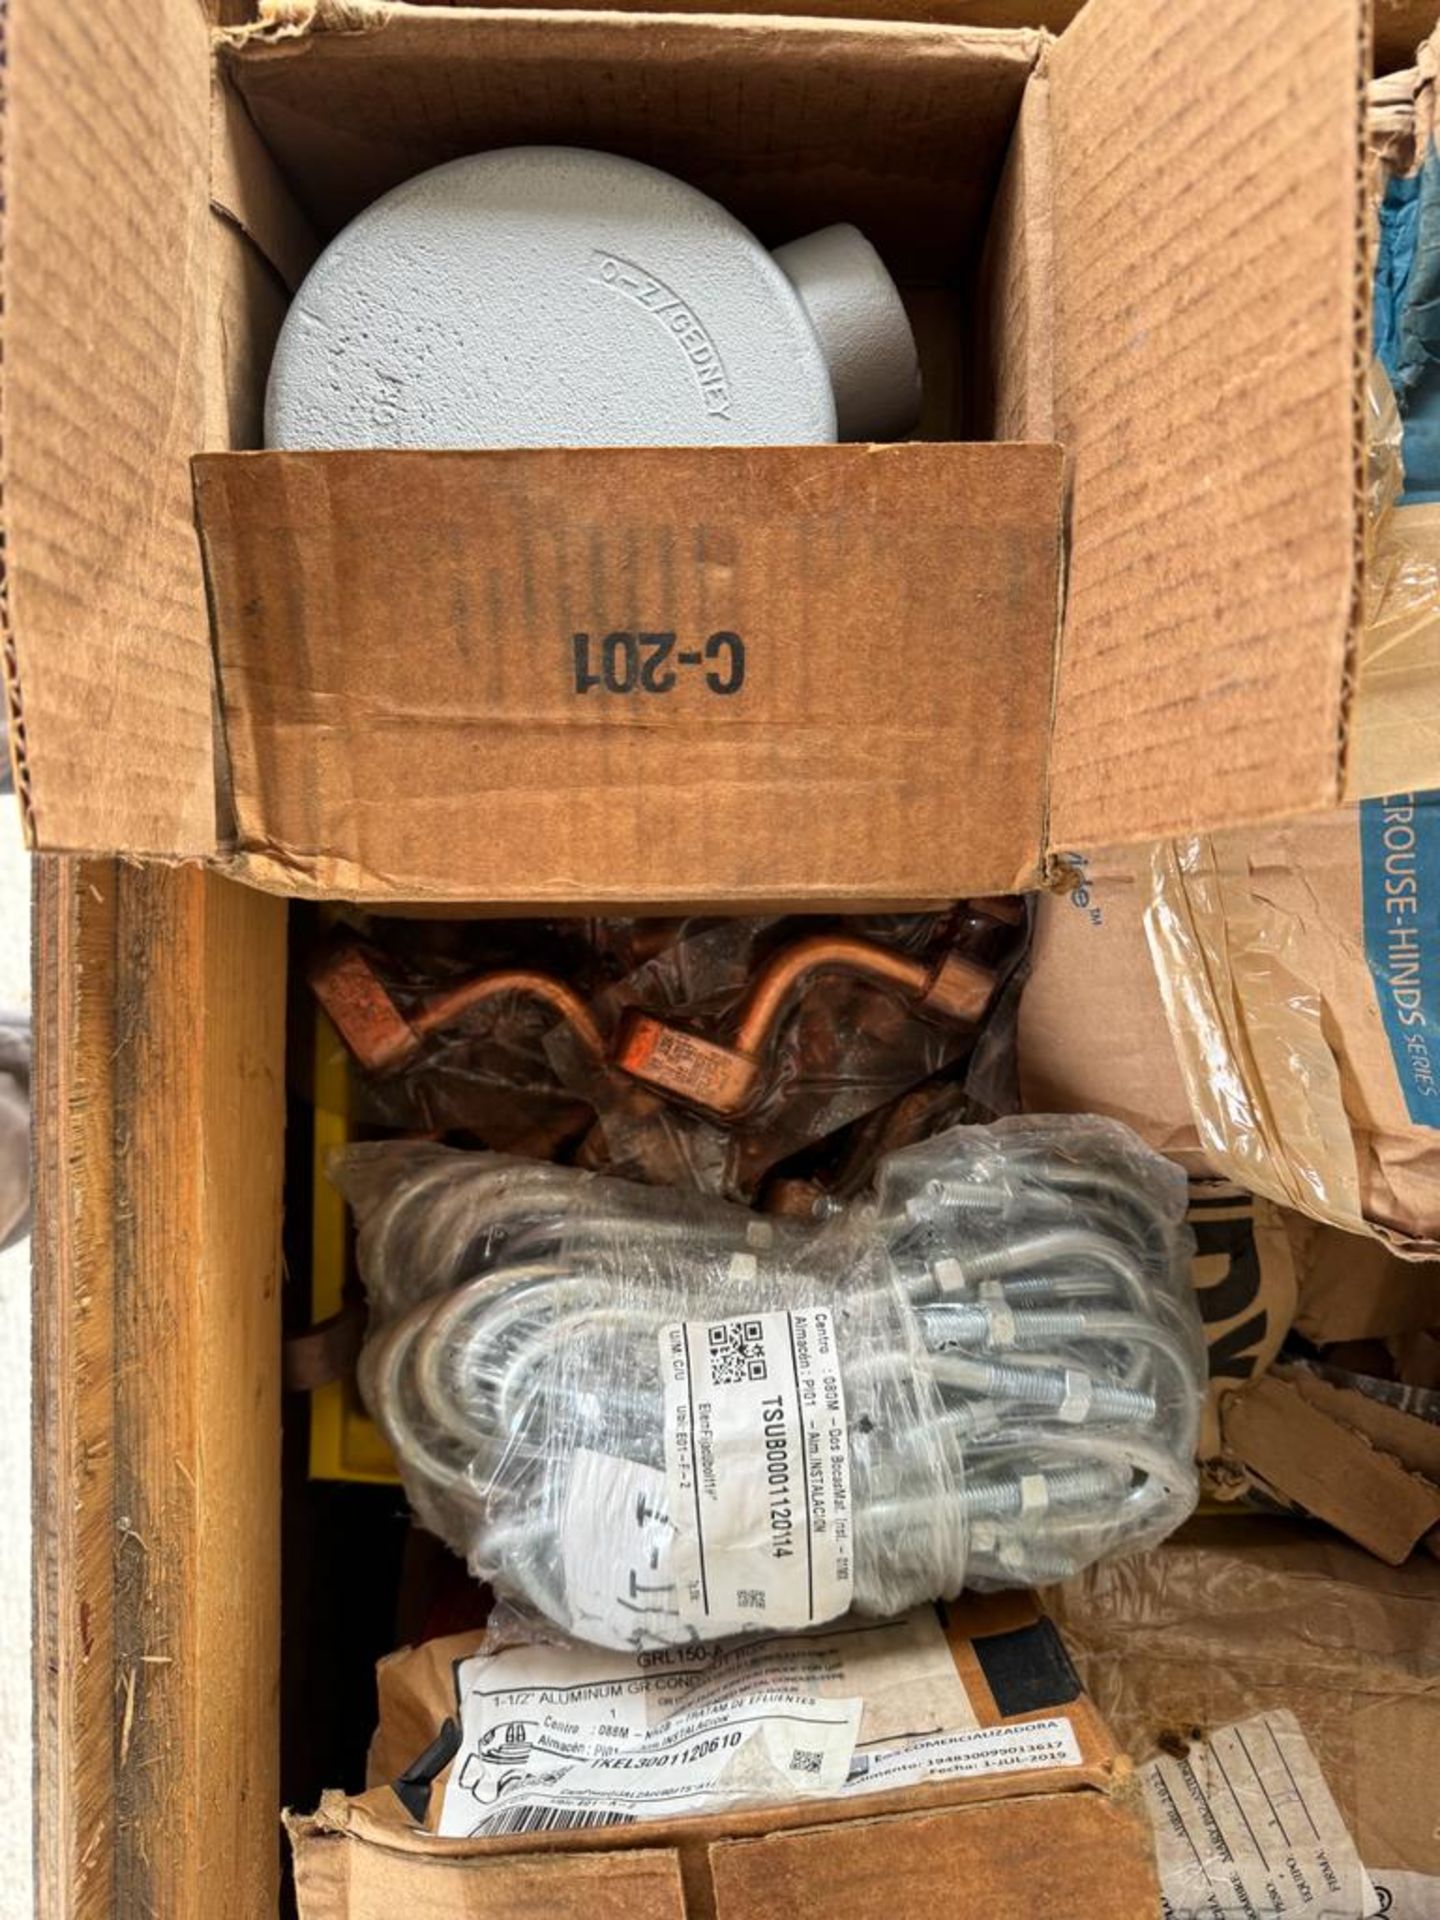 LOT OF (20,488) PIECES OF MISCELLANEOUS ELECTRICAL MATERIAL - Image 68 of 115